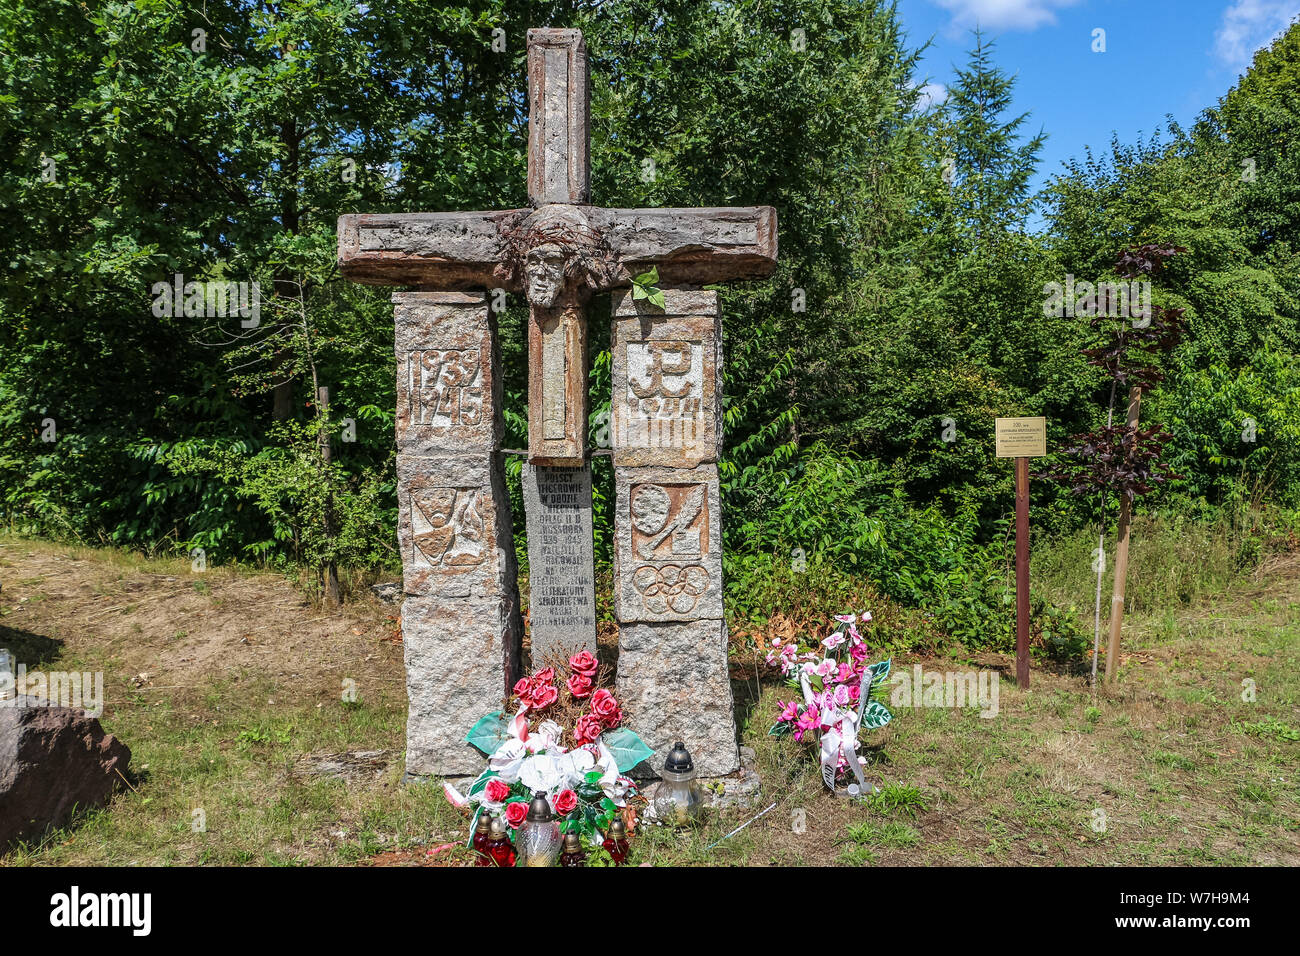 Borne Sulinowo, Poland. 3rd, August  2019 Monument in memoriam of killed prisoners - soldiers in the Oflag is seen in Borne Sulinowo, Poland on 3 August 2019 Oflag II-D was a WWII German prisoner-of-war camp located at Gross Born was established to house French officers from the Battle of France, later Polish and Soviet soldiers. In Ja. 1945 there were 5,014 officers and 377 orderlies in the camp. © Vadim Pacajev / Alamy Live News Stock Photo